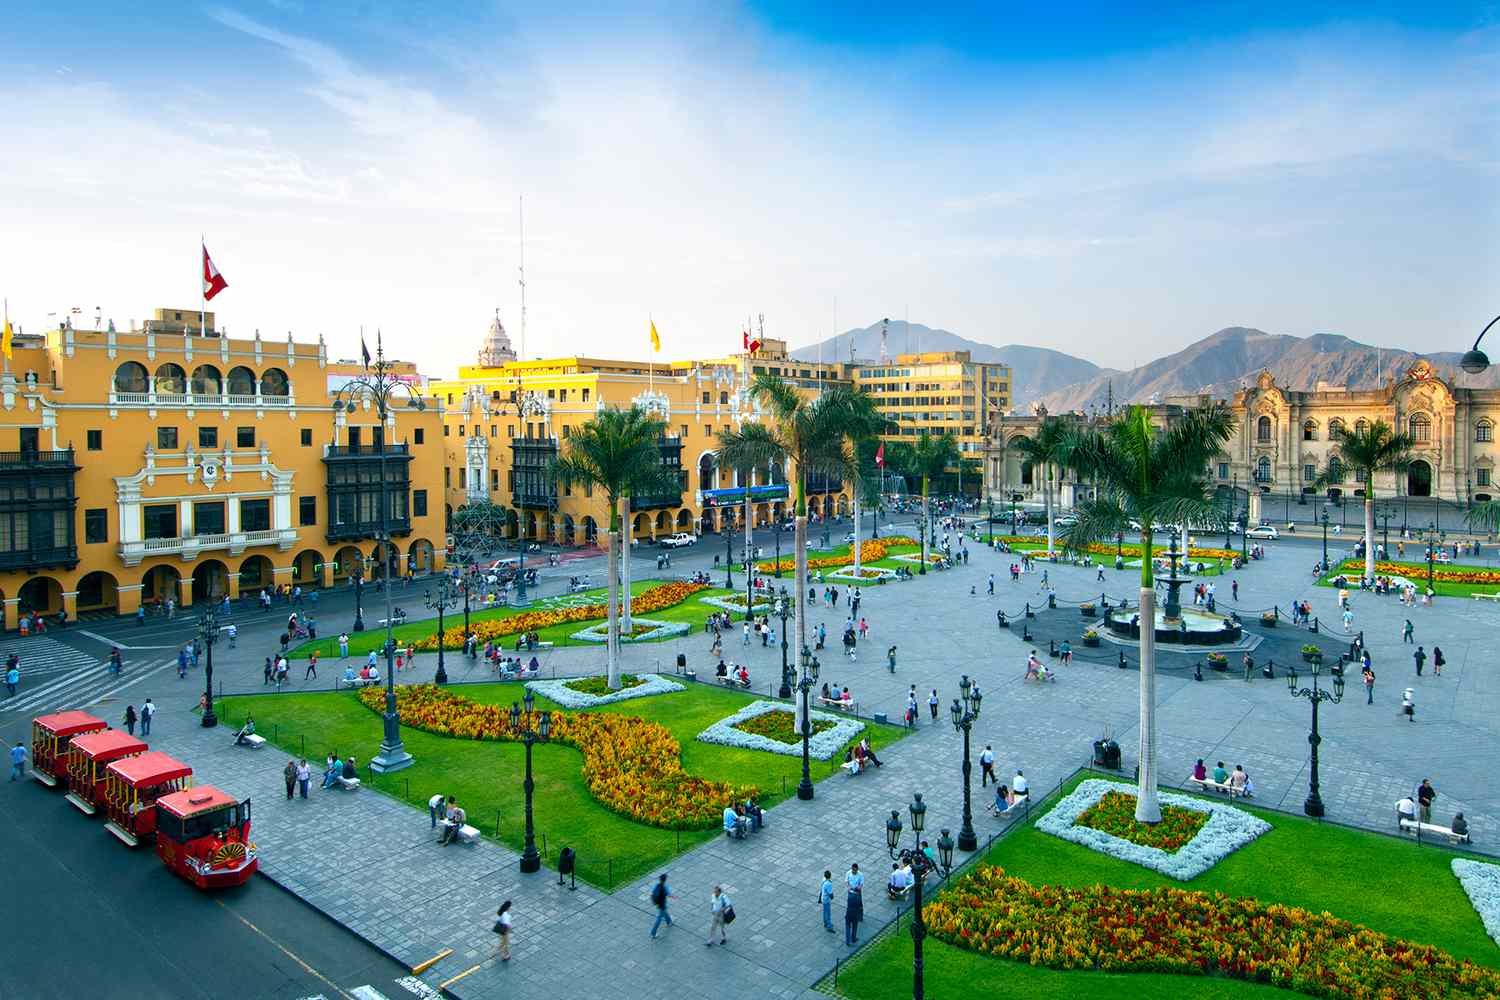 Lima Travel Guide